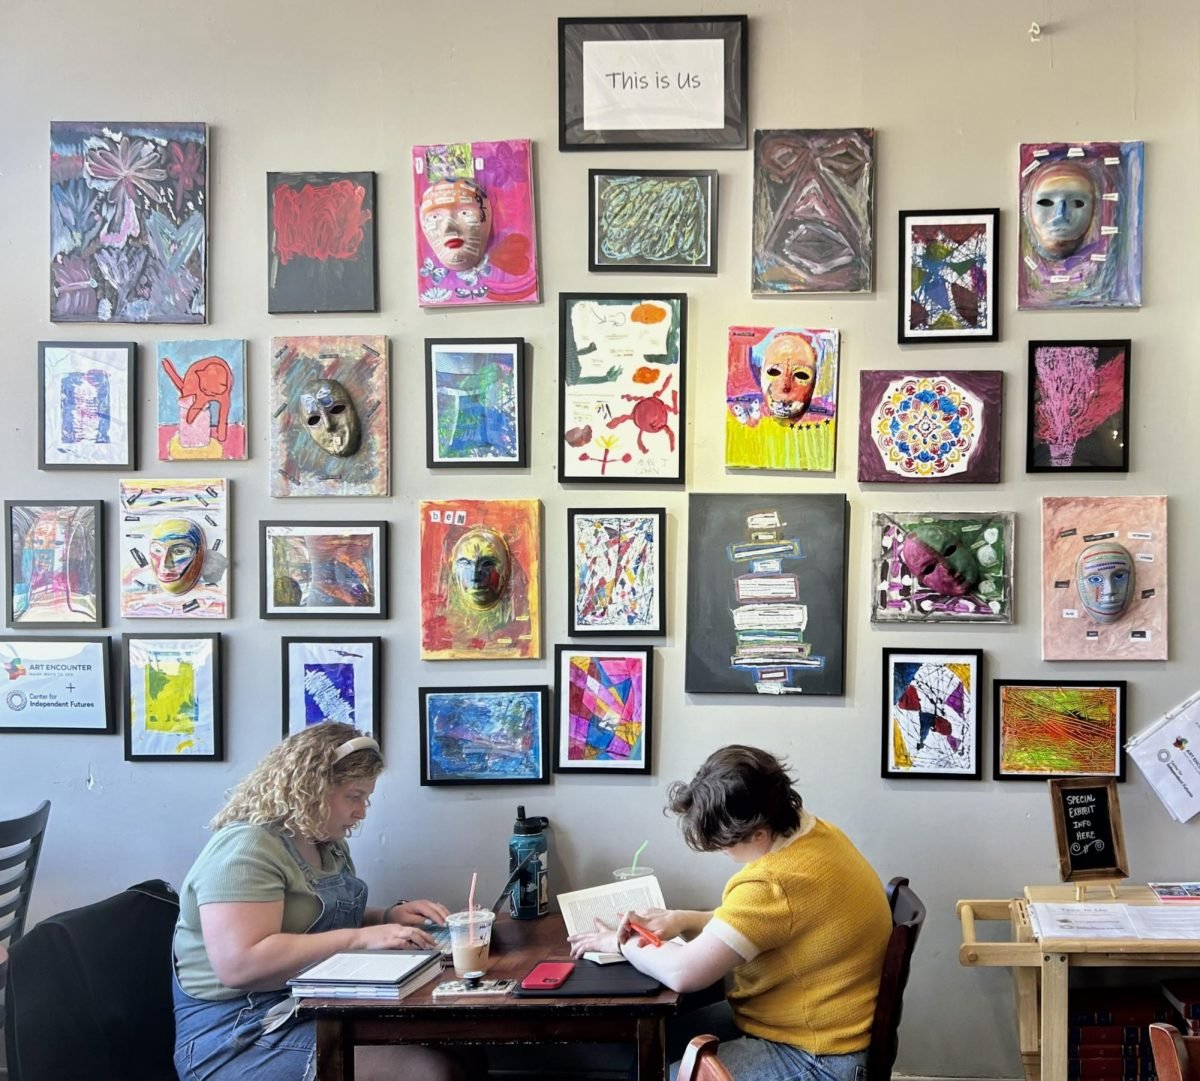 Two people sit at a table in front of a wall with several pieces of art on it.